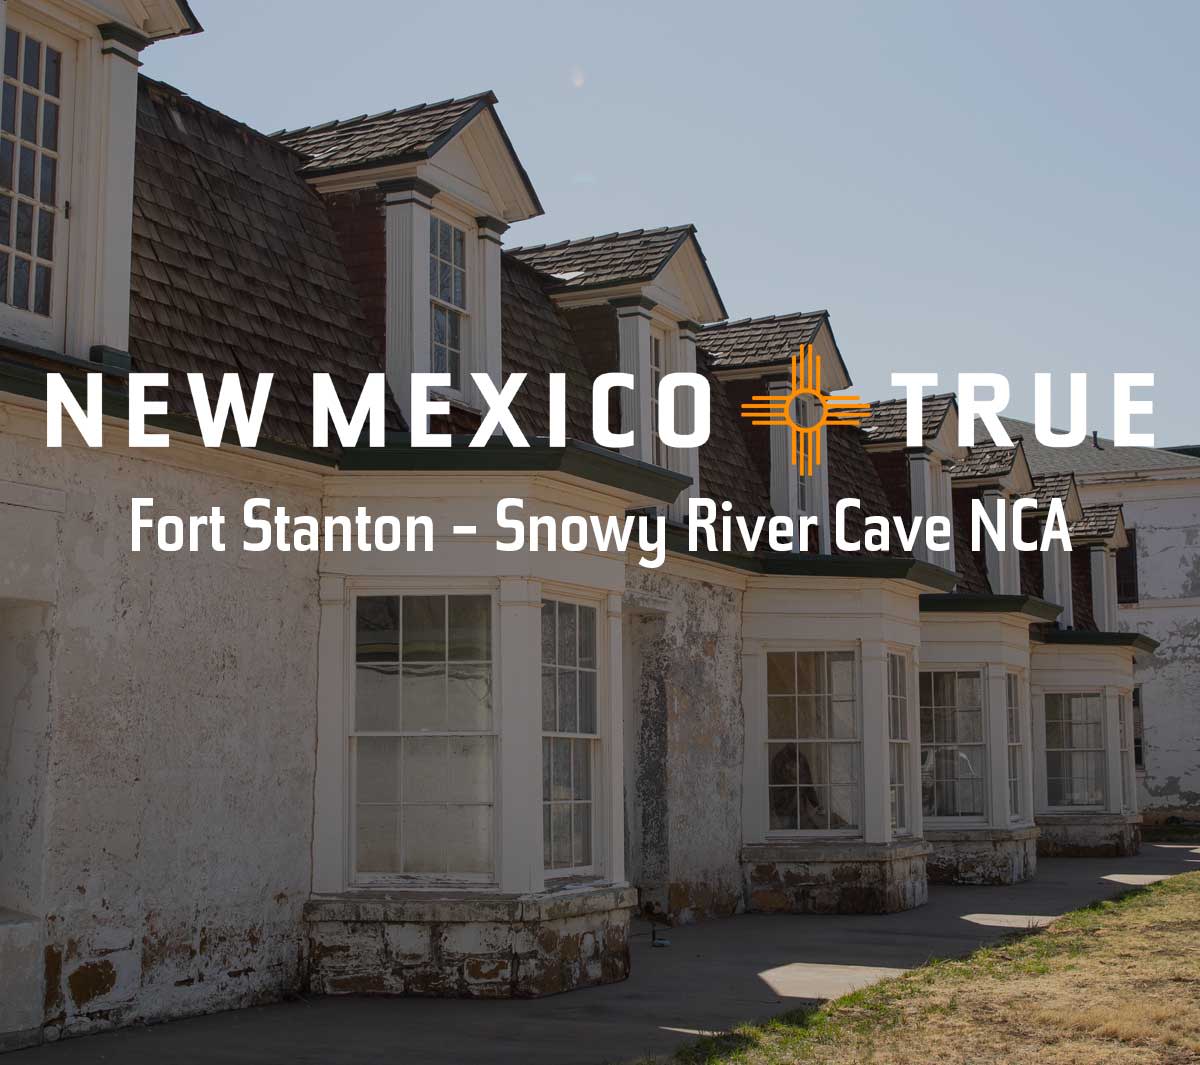 Fort Stanton - Snowy River Cave NCA